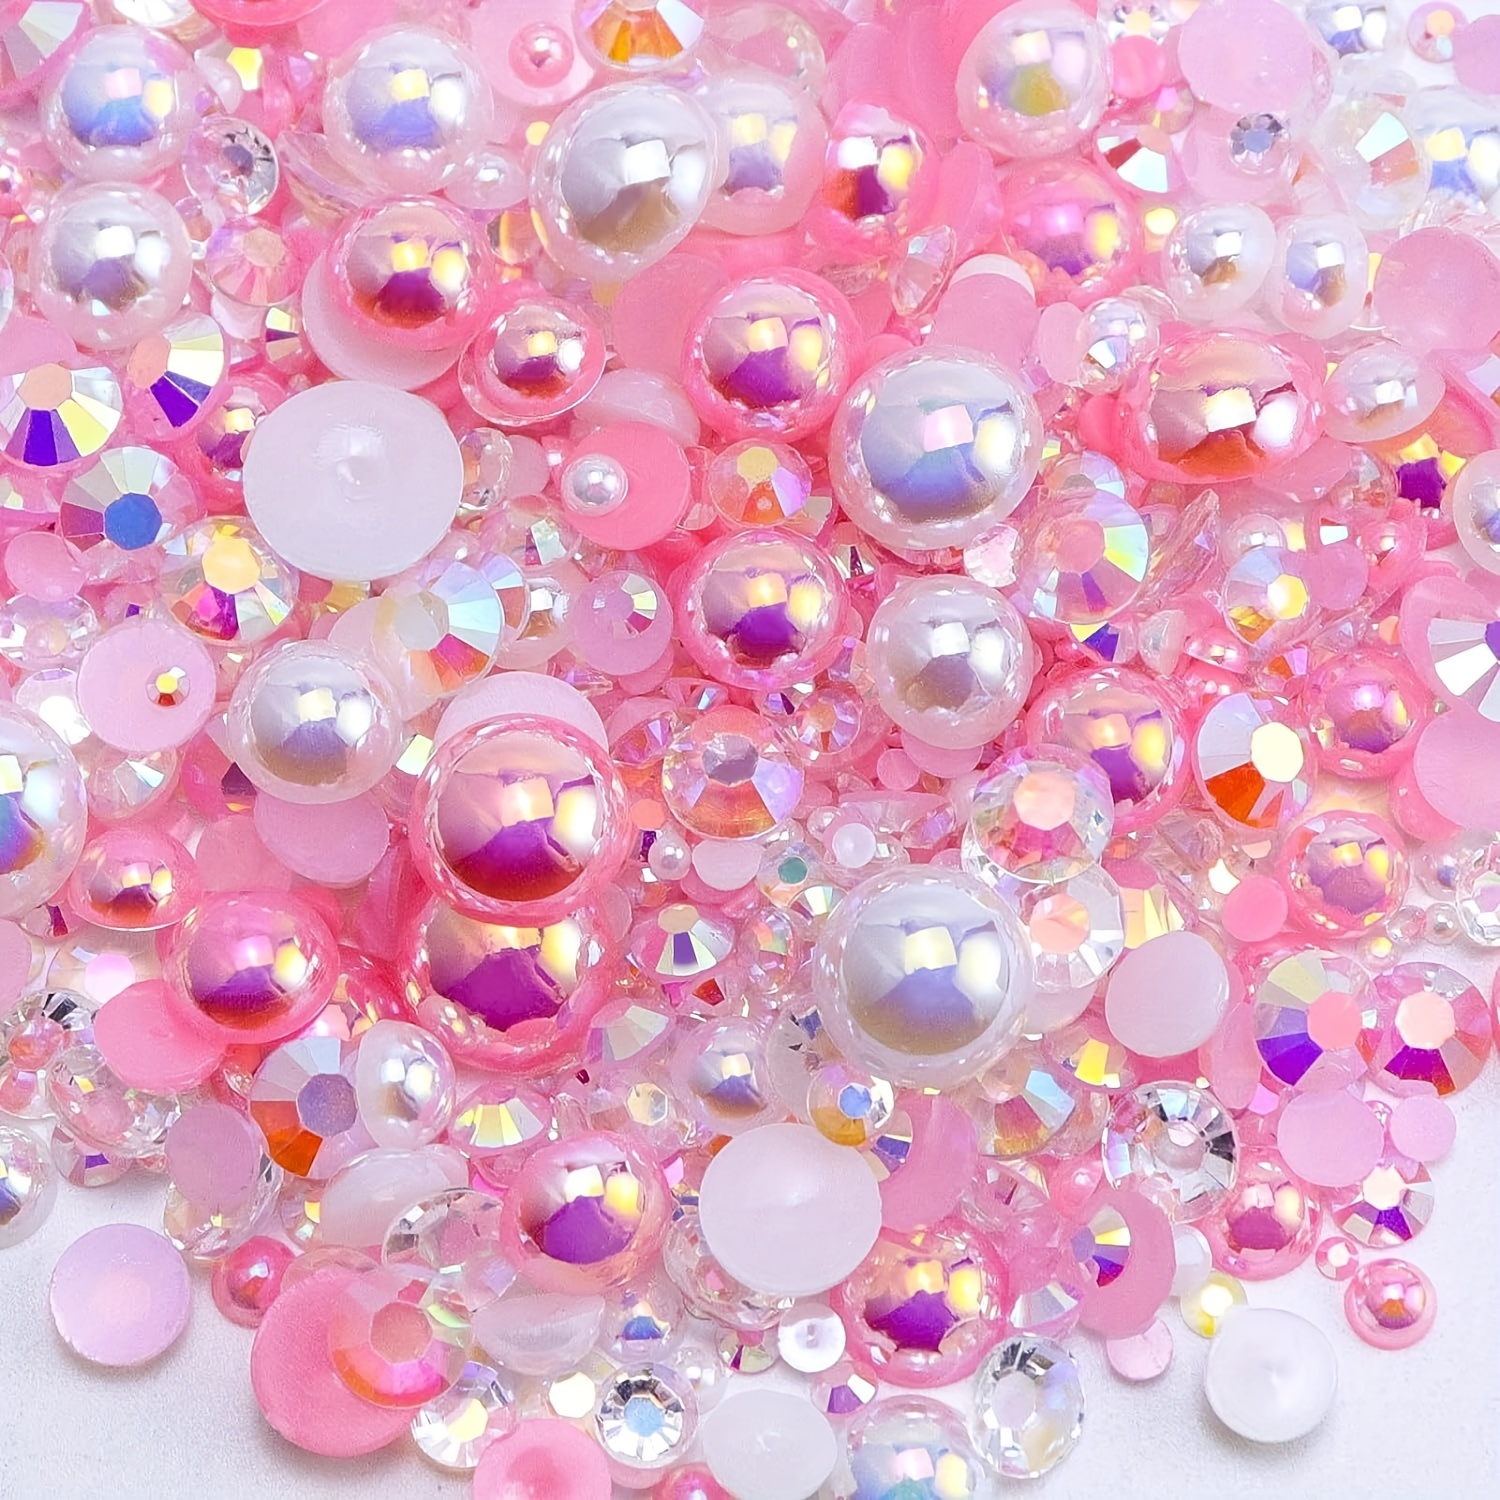 Flatback Pearls for Crafts, 50g Pink AB Half Pearls for Crafts, Mixed Size  3/4/5/6/8/10mm Flatback Half Round Pearls Beads for Craft Tumbler Shoes